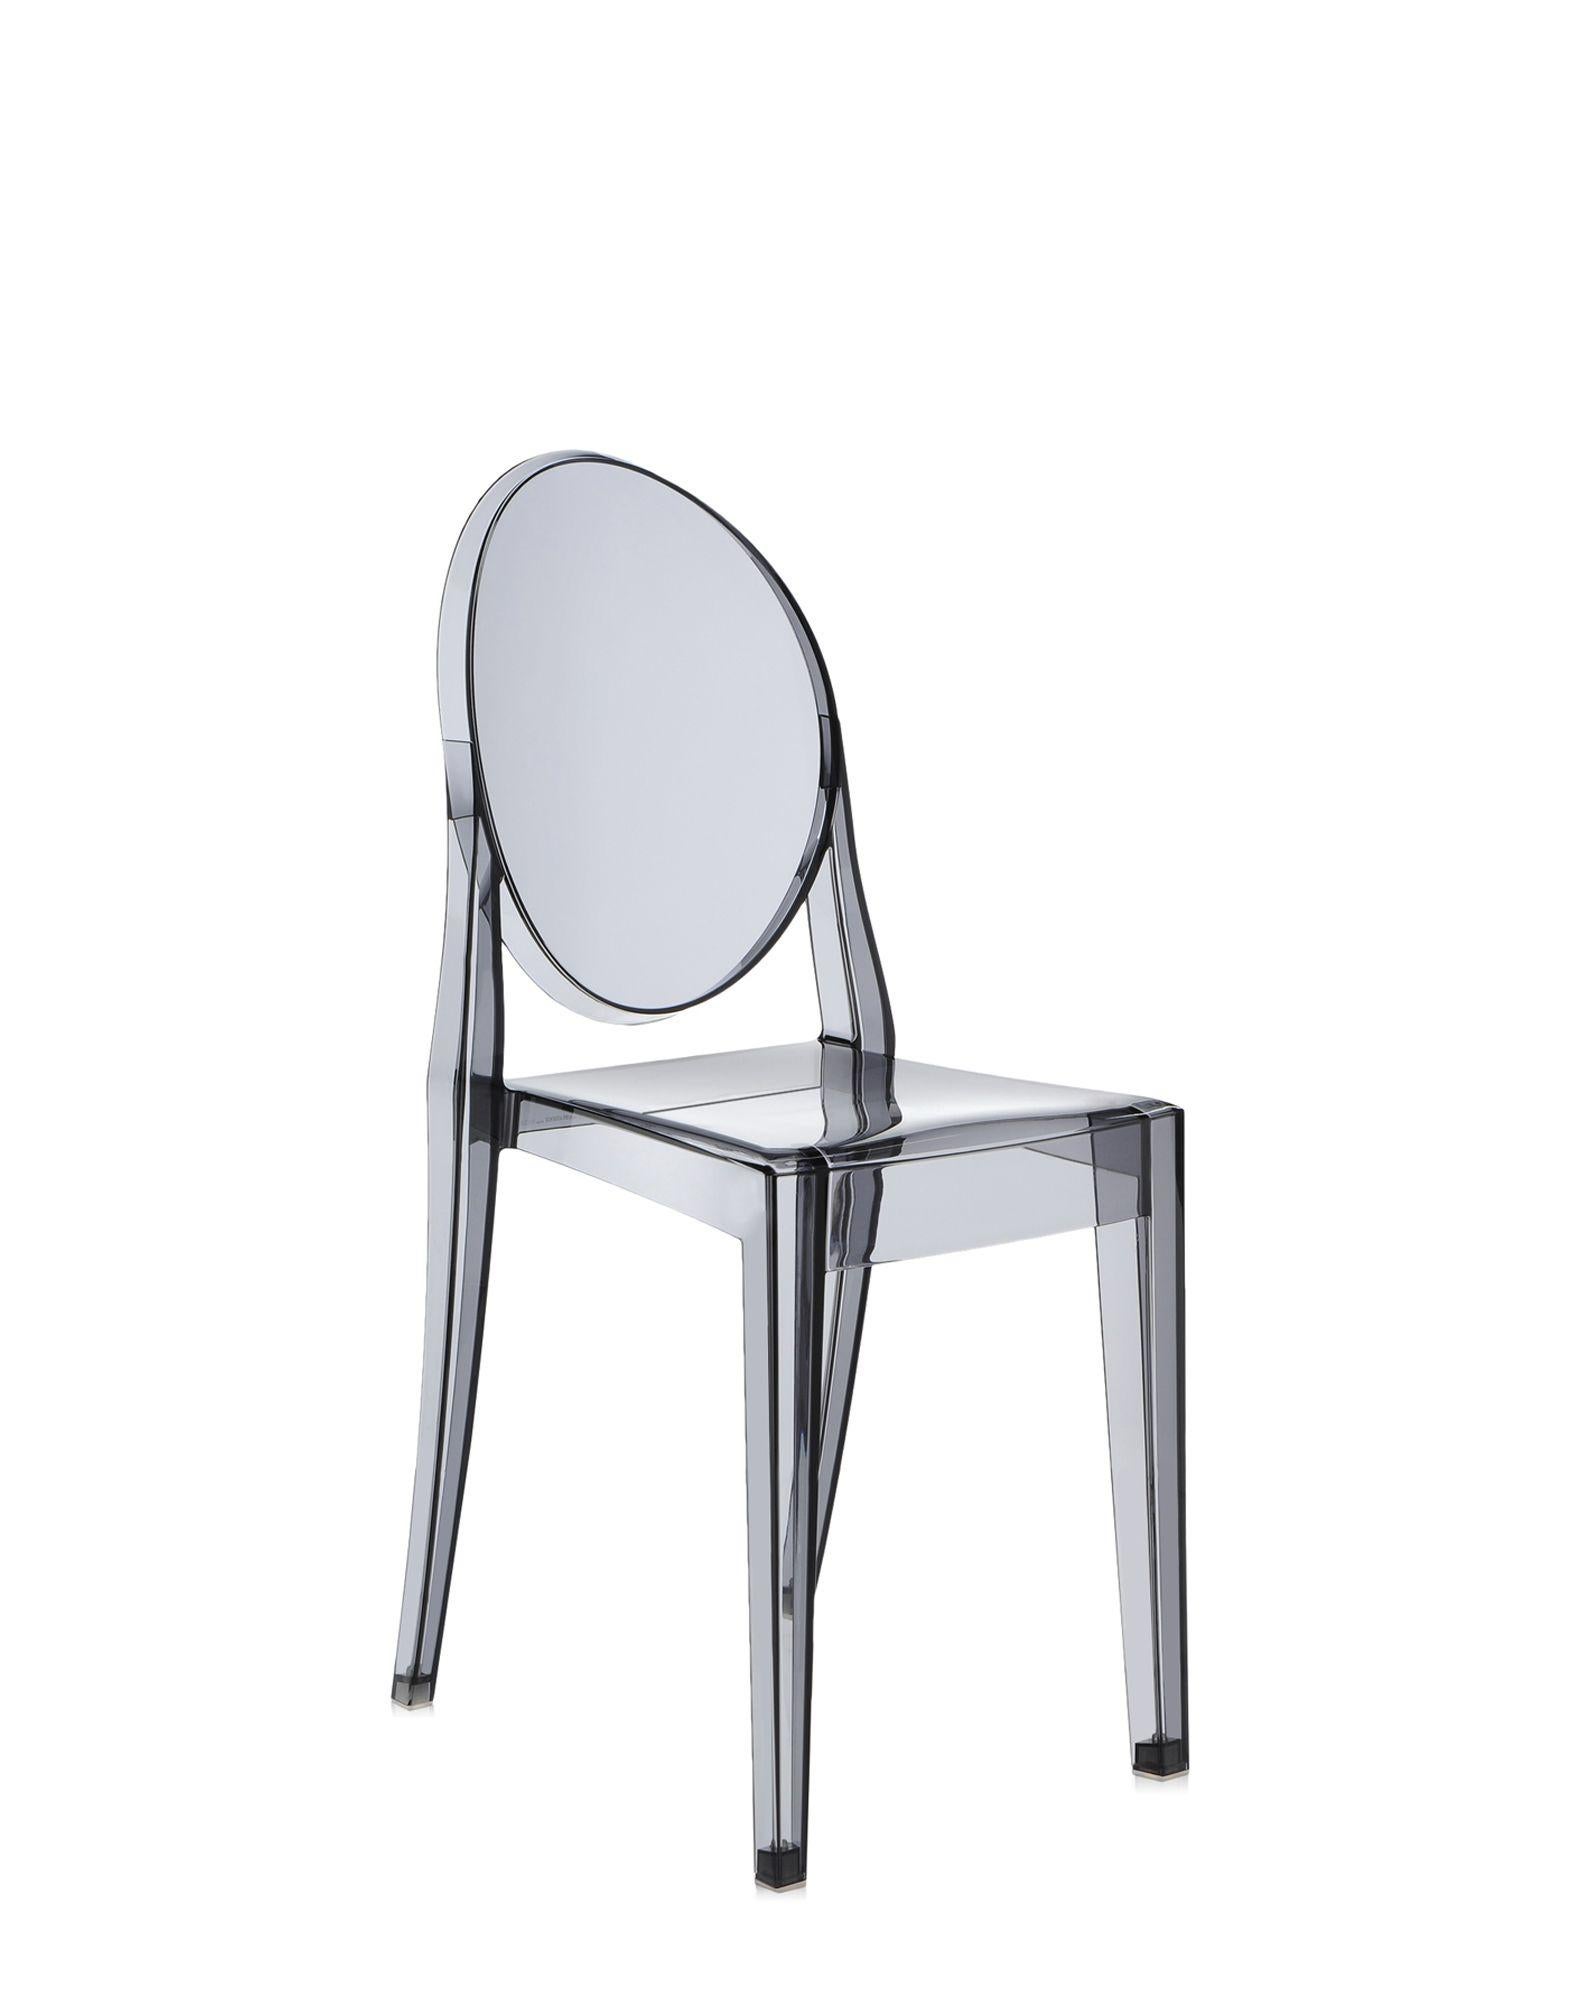 This is a chair born of Classic lines with a rounded backrest that recalls the shape of antique medallions, whilst the seat is linear and geometric. Victoria ghost is made of transparent, colored polycarbonate and formed in a single injection mould.